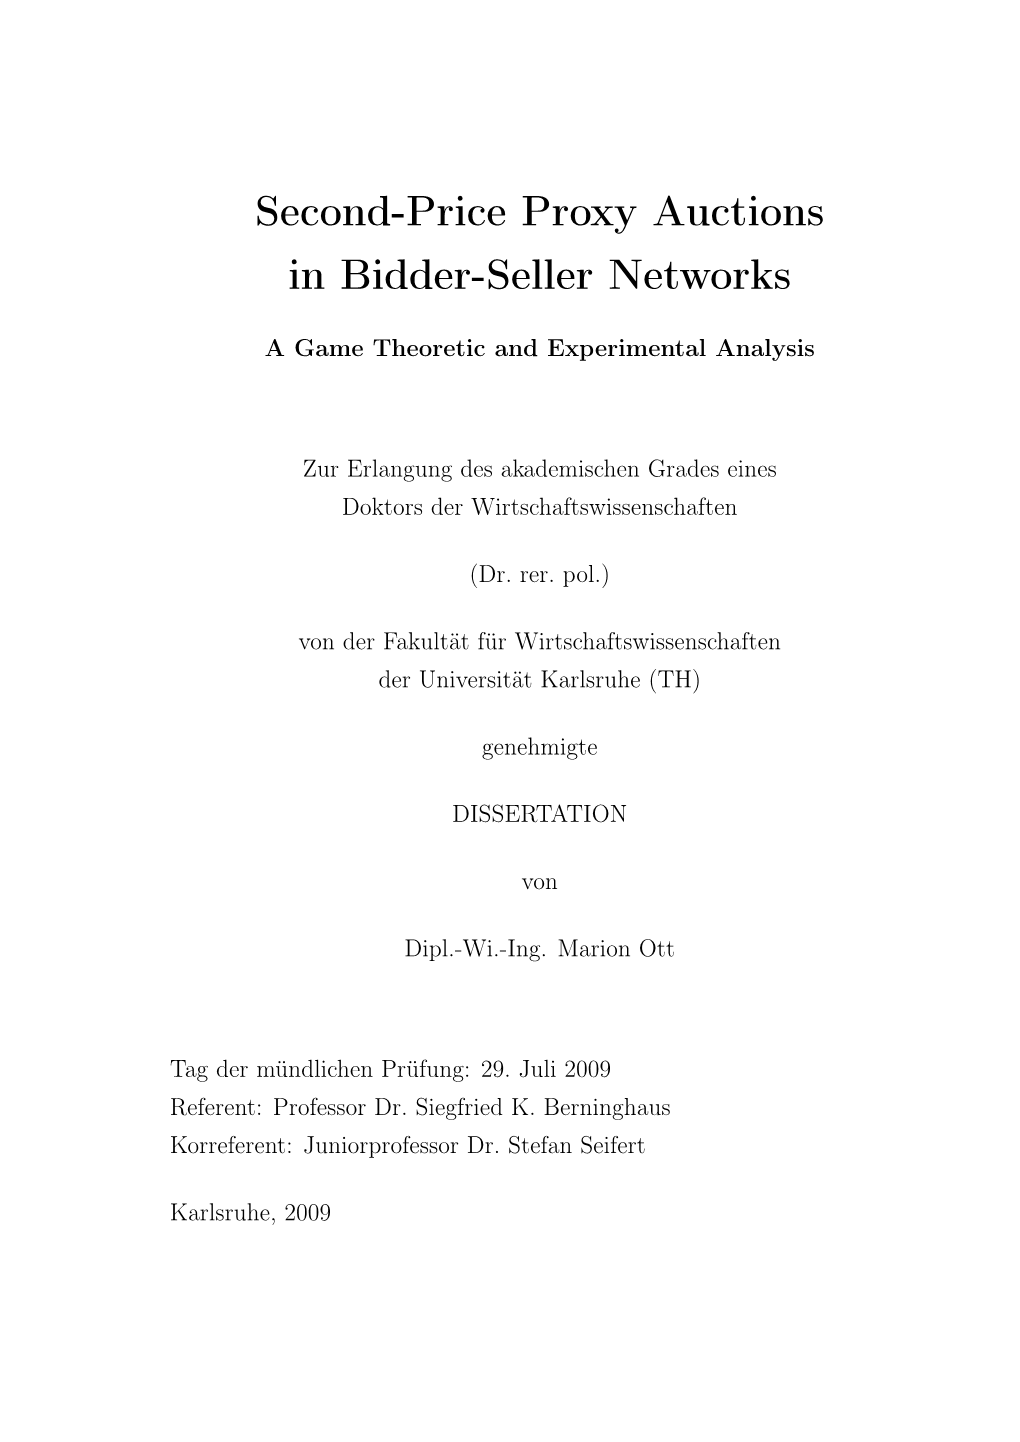 Second-Price Proxy Auctions in Bidder-Seller Networks